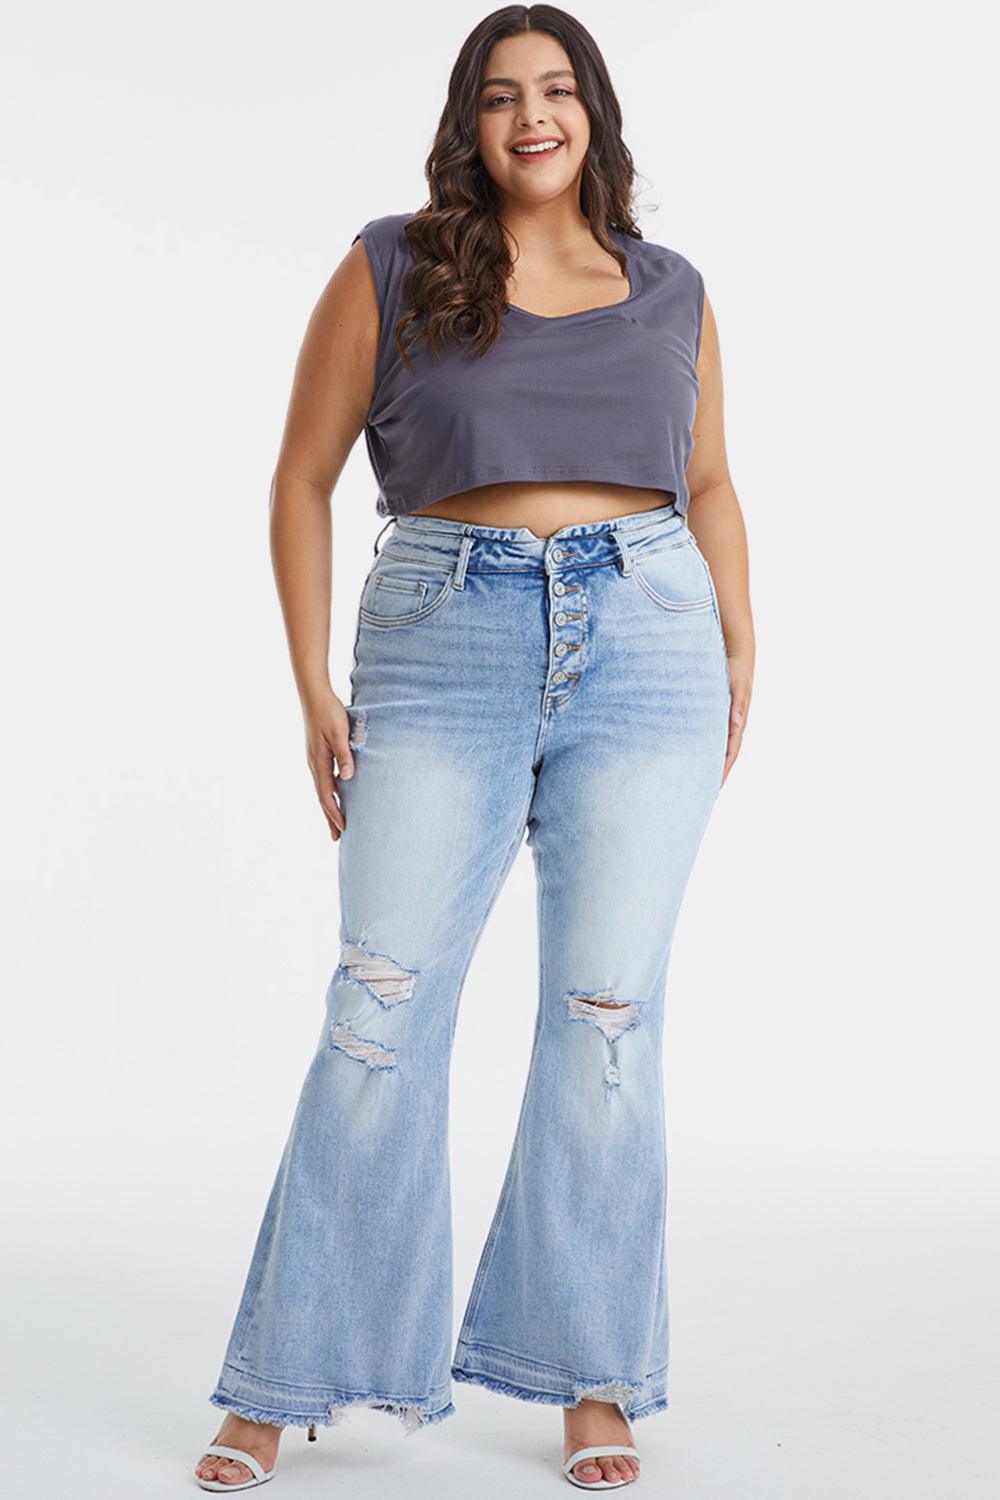 a woman in a crop top and jeans